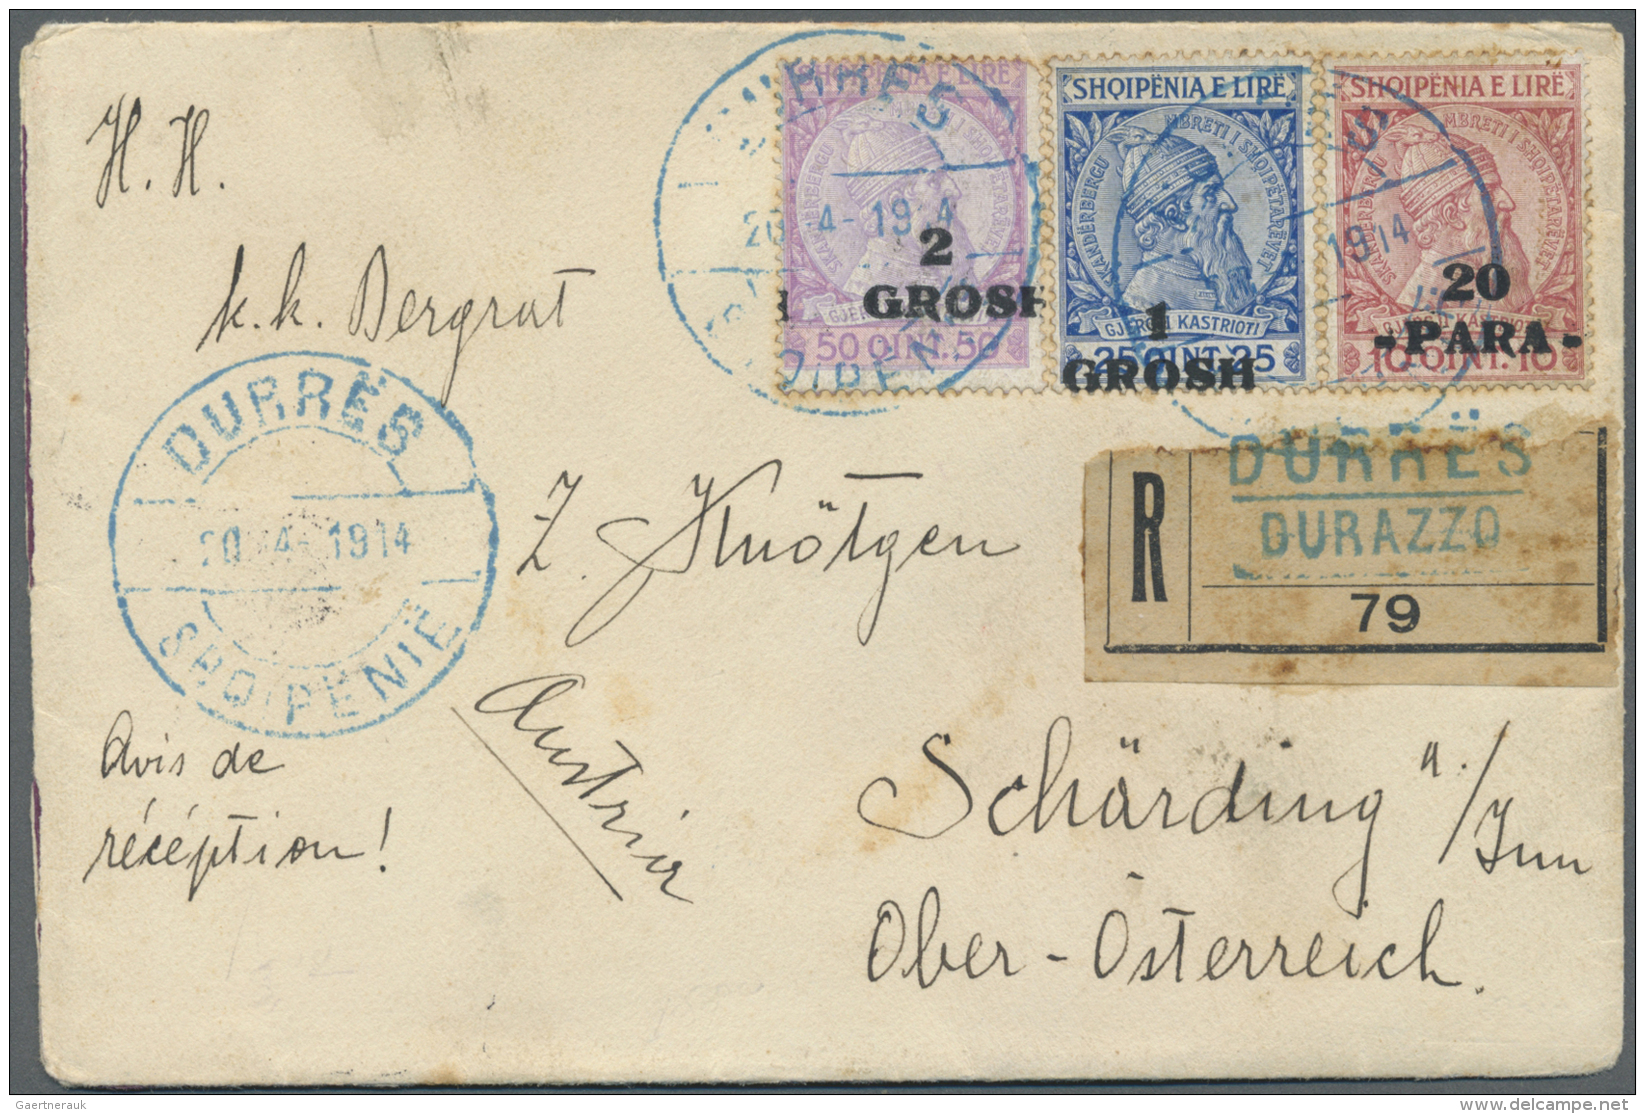 Albanien: 1914, 2 Gr./50 Q., 1 Gr./25 Q. And 20 P./10 Q. Tied Blue "DURRES 20.4.1914" To Small Envelope By Registered-AR - Albania